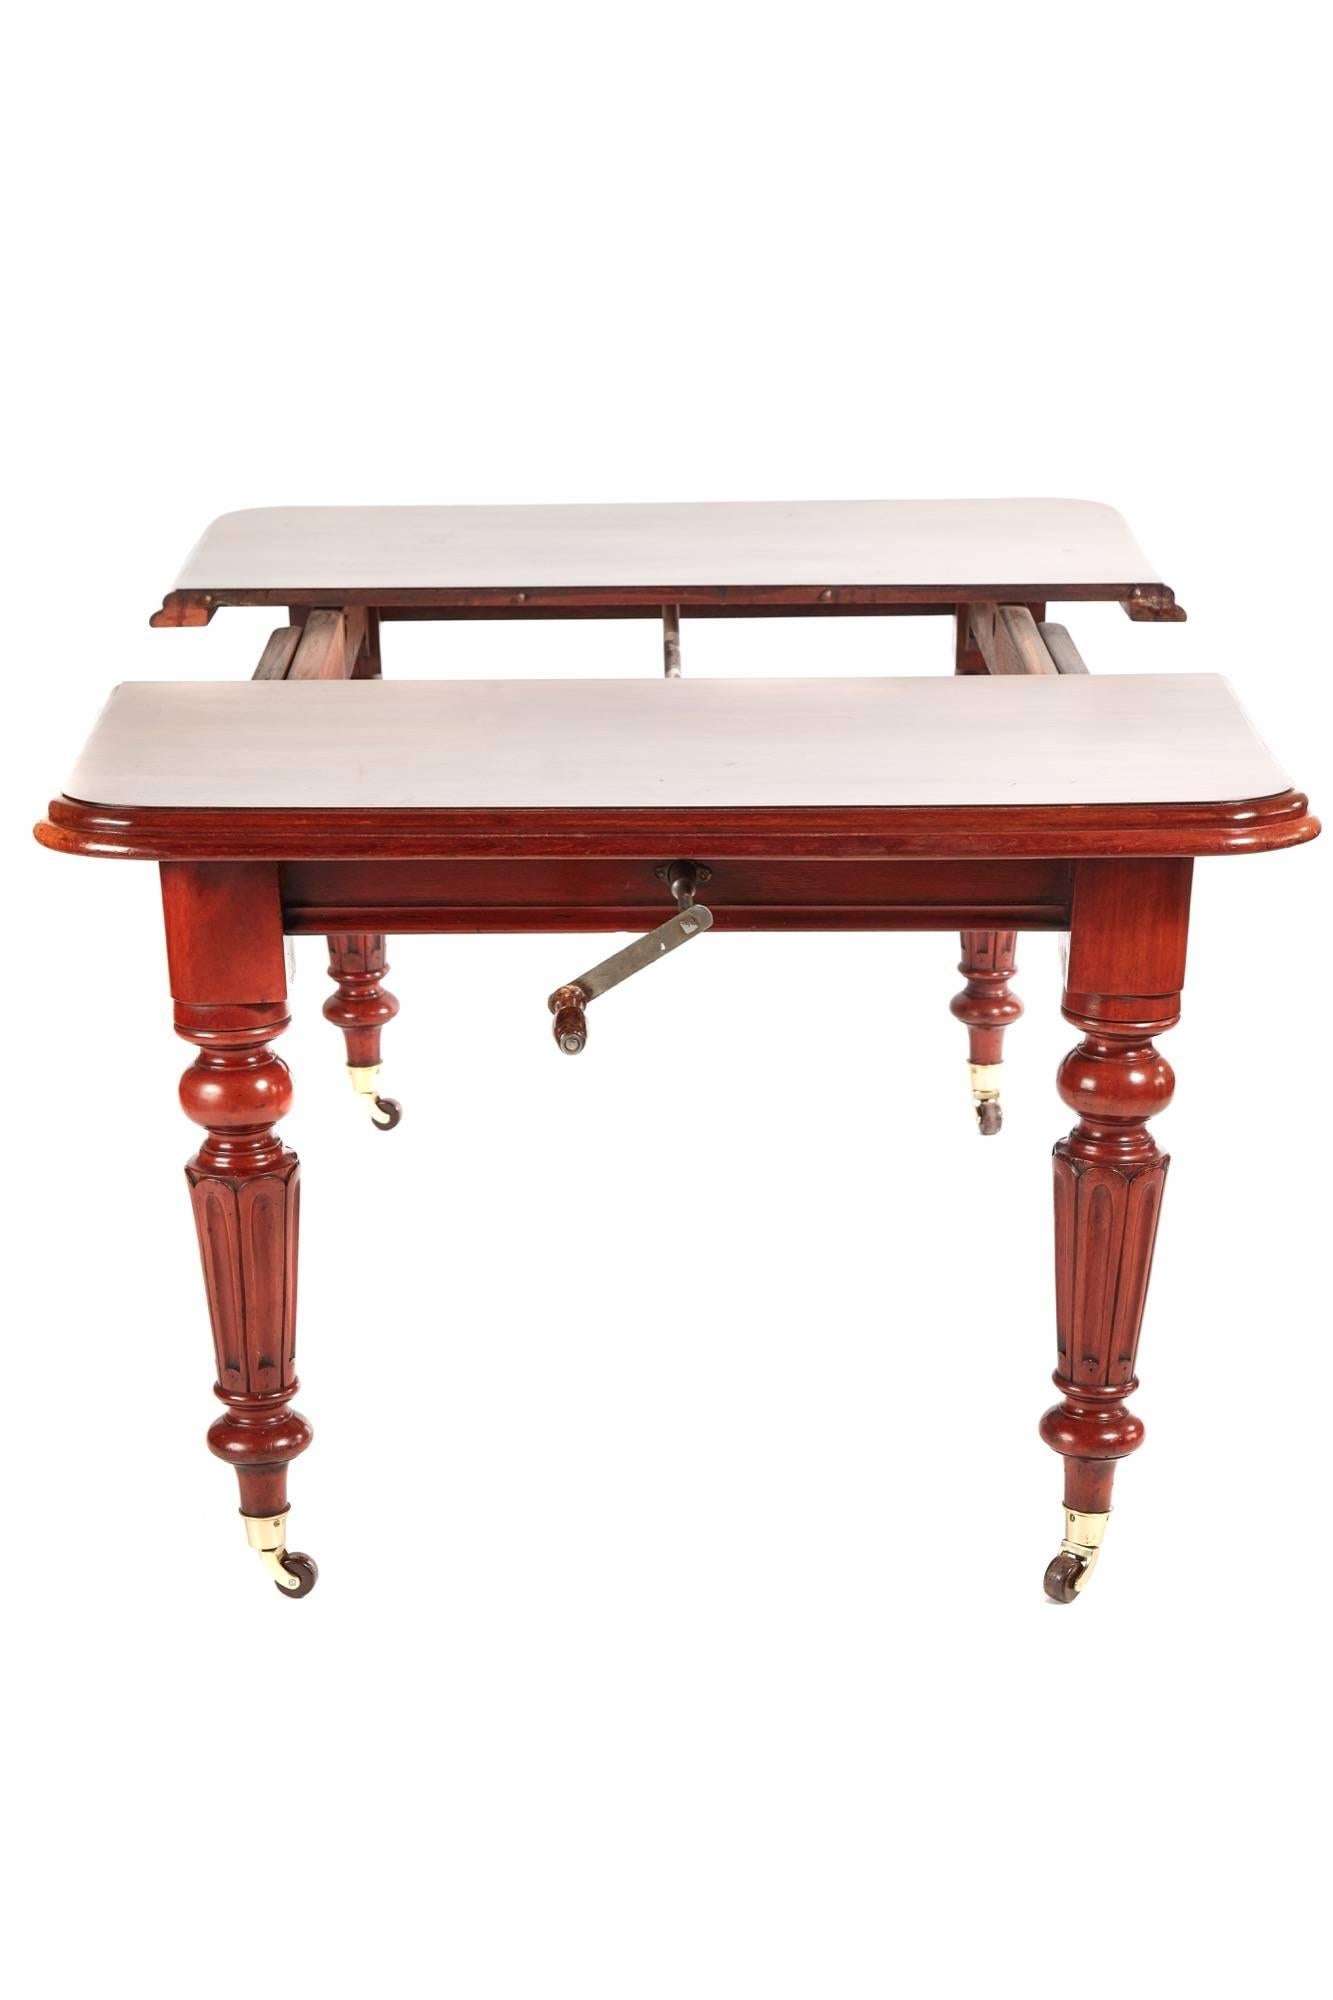 Victorian mahogany extending dining table, fantastic mahogany top with double moulded edge, one extra leaf, standing on four turned reeded legs, original winding handle
Fantastic color and condition
open 56